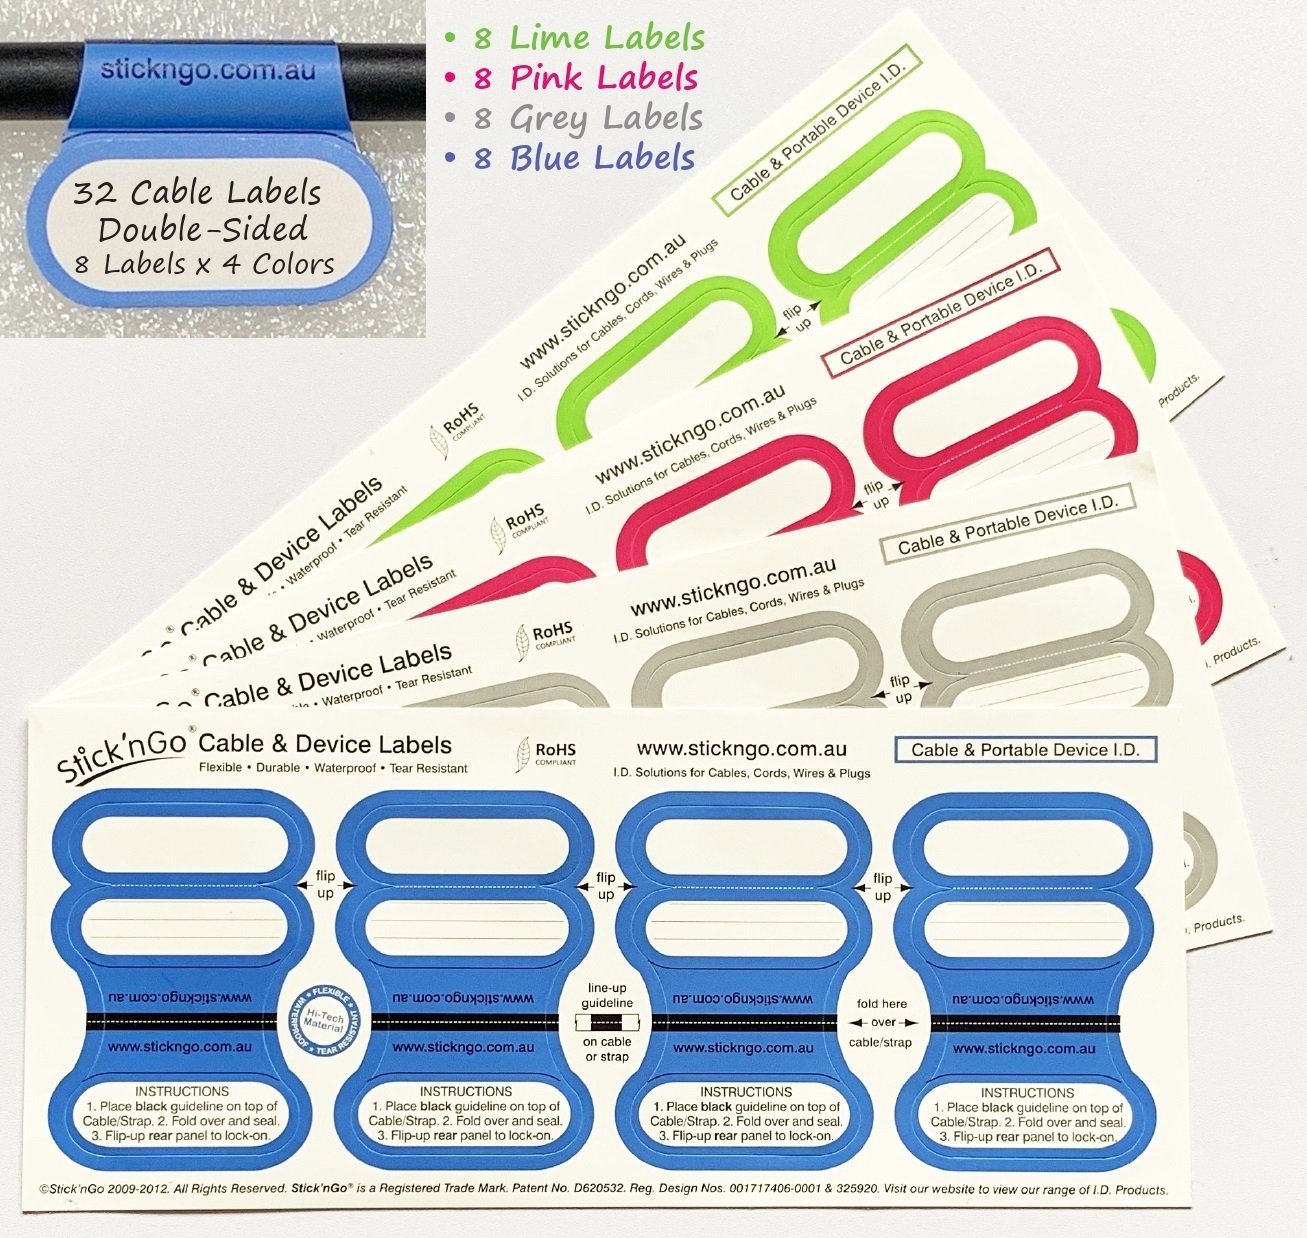 Image of Self-adhesive 'Office Size' Cable Labels - 32 Multicolour Pack